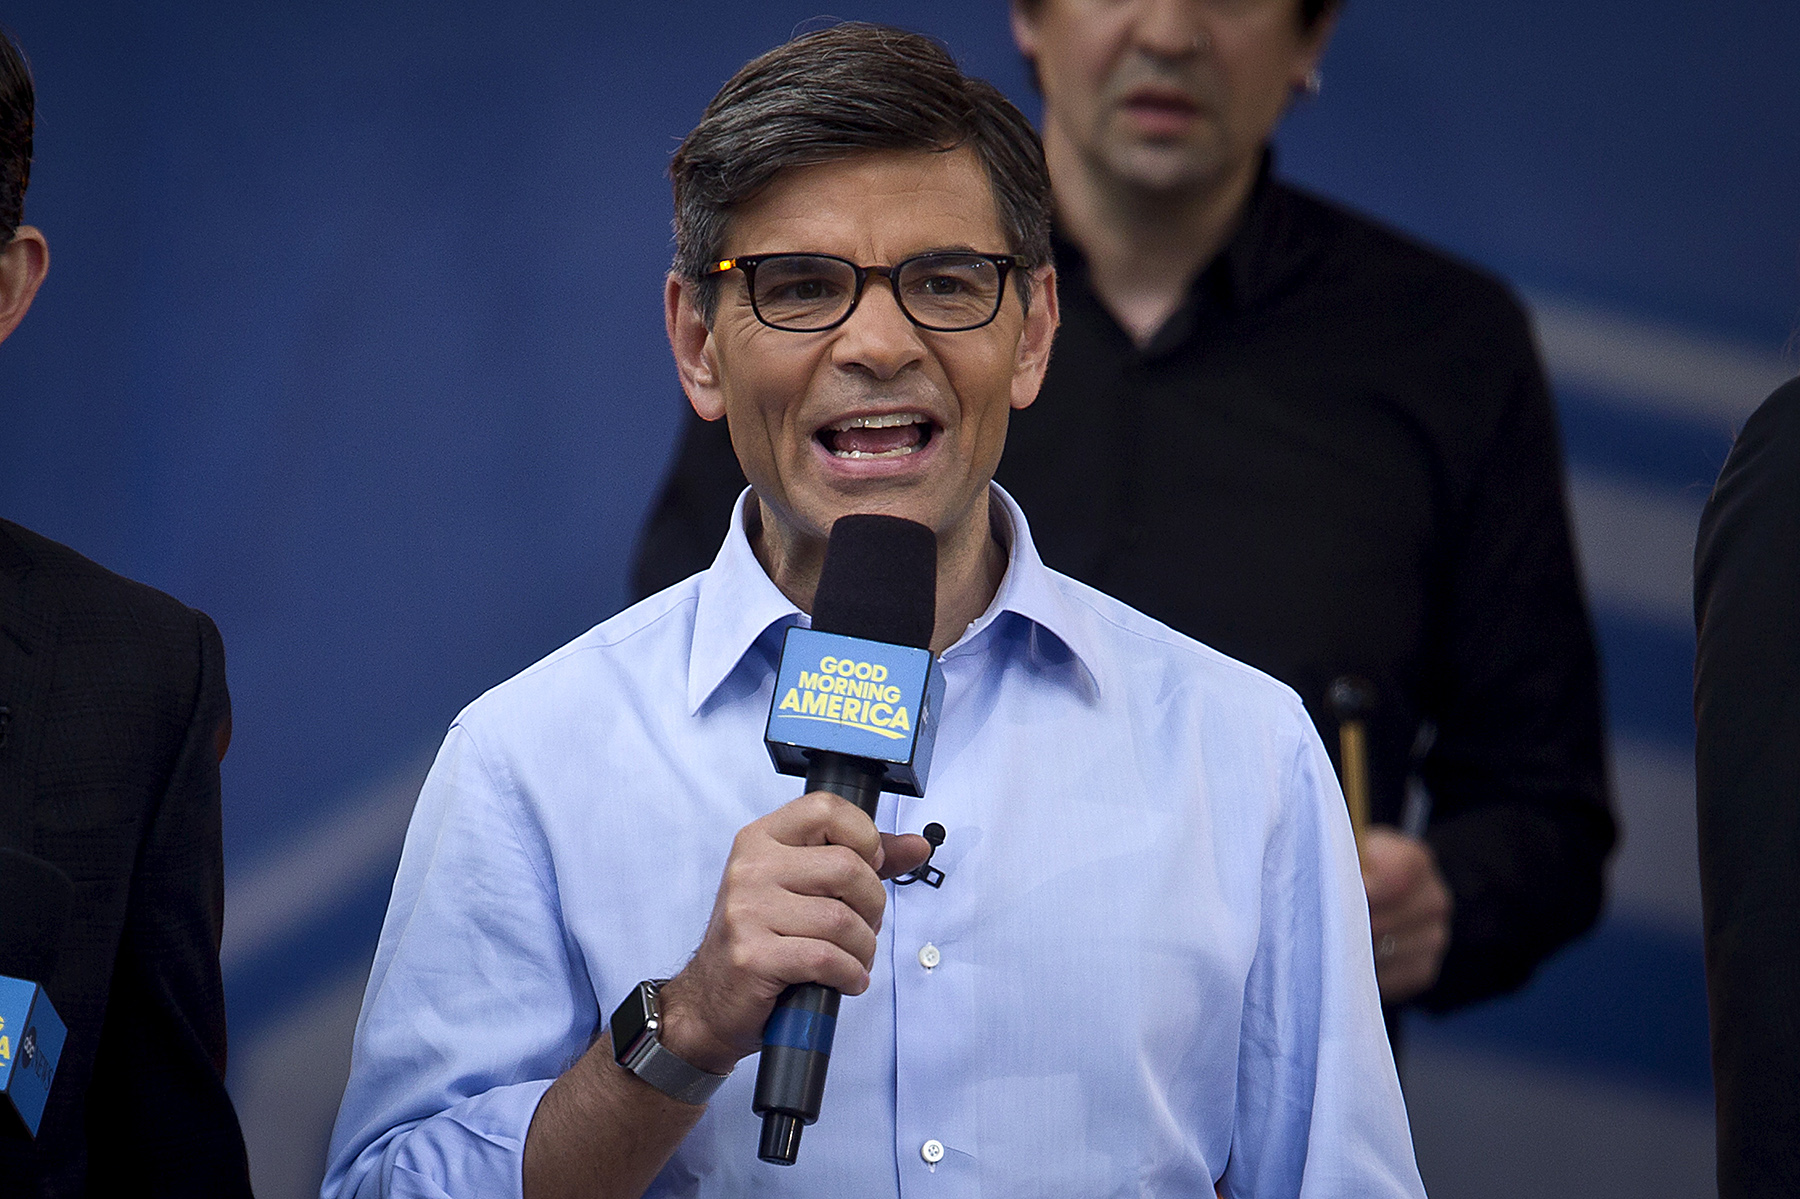 TV host George Stephanopoulos appears on ABC TV's "Good Morning America" in Central Park in the Manhattan borough of New York